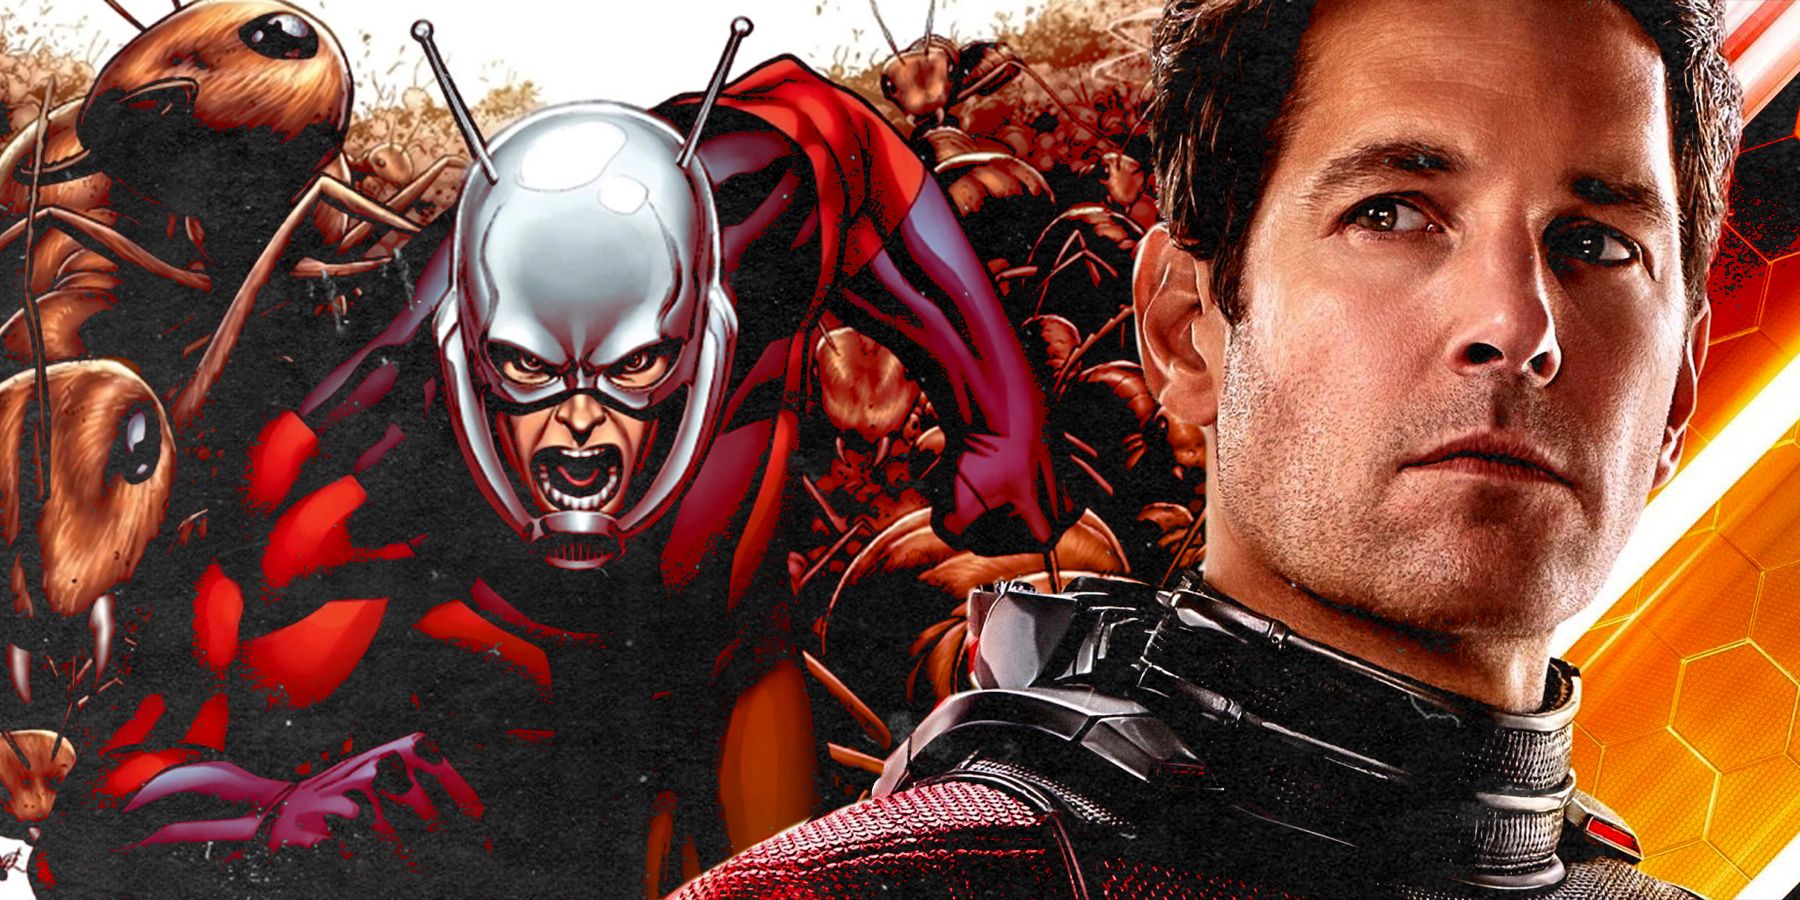 Ant-Man in the comics running with ants and Scott Lang from the MCU split image